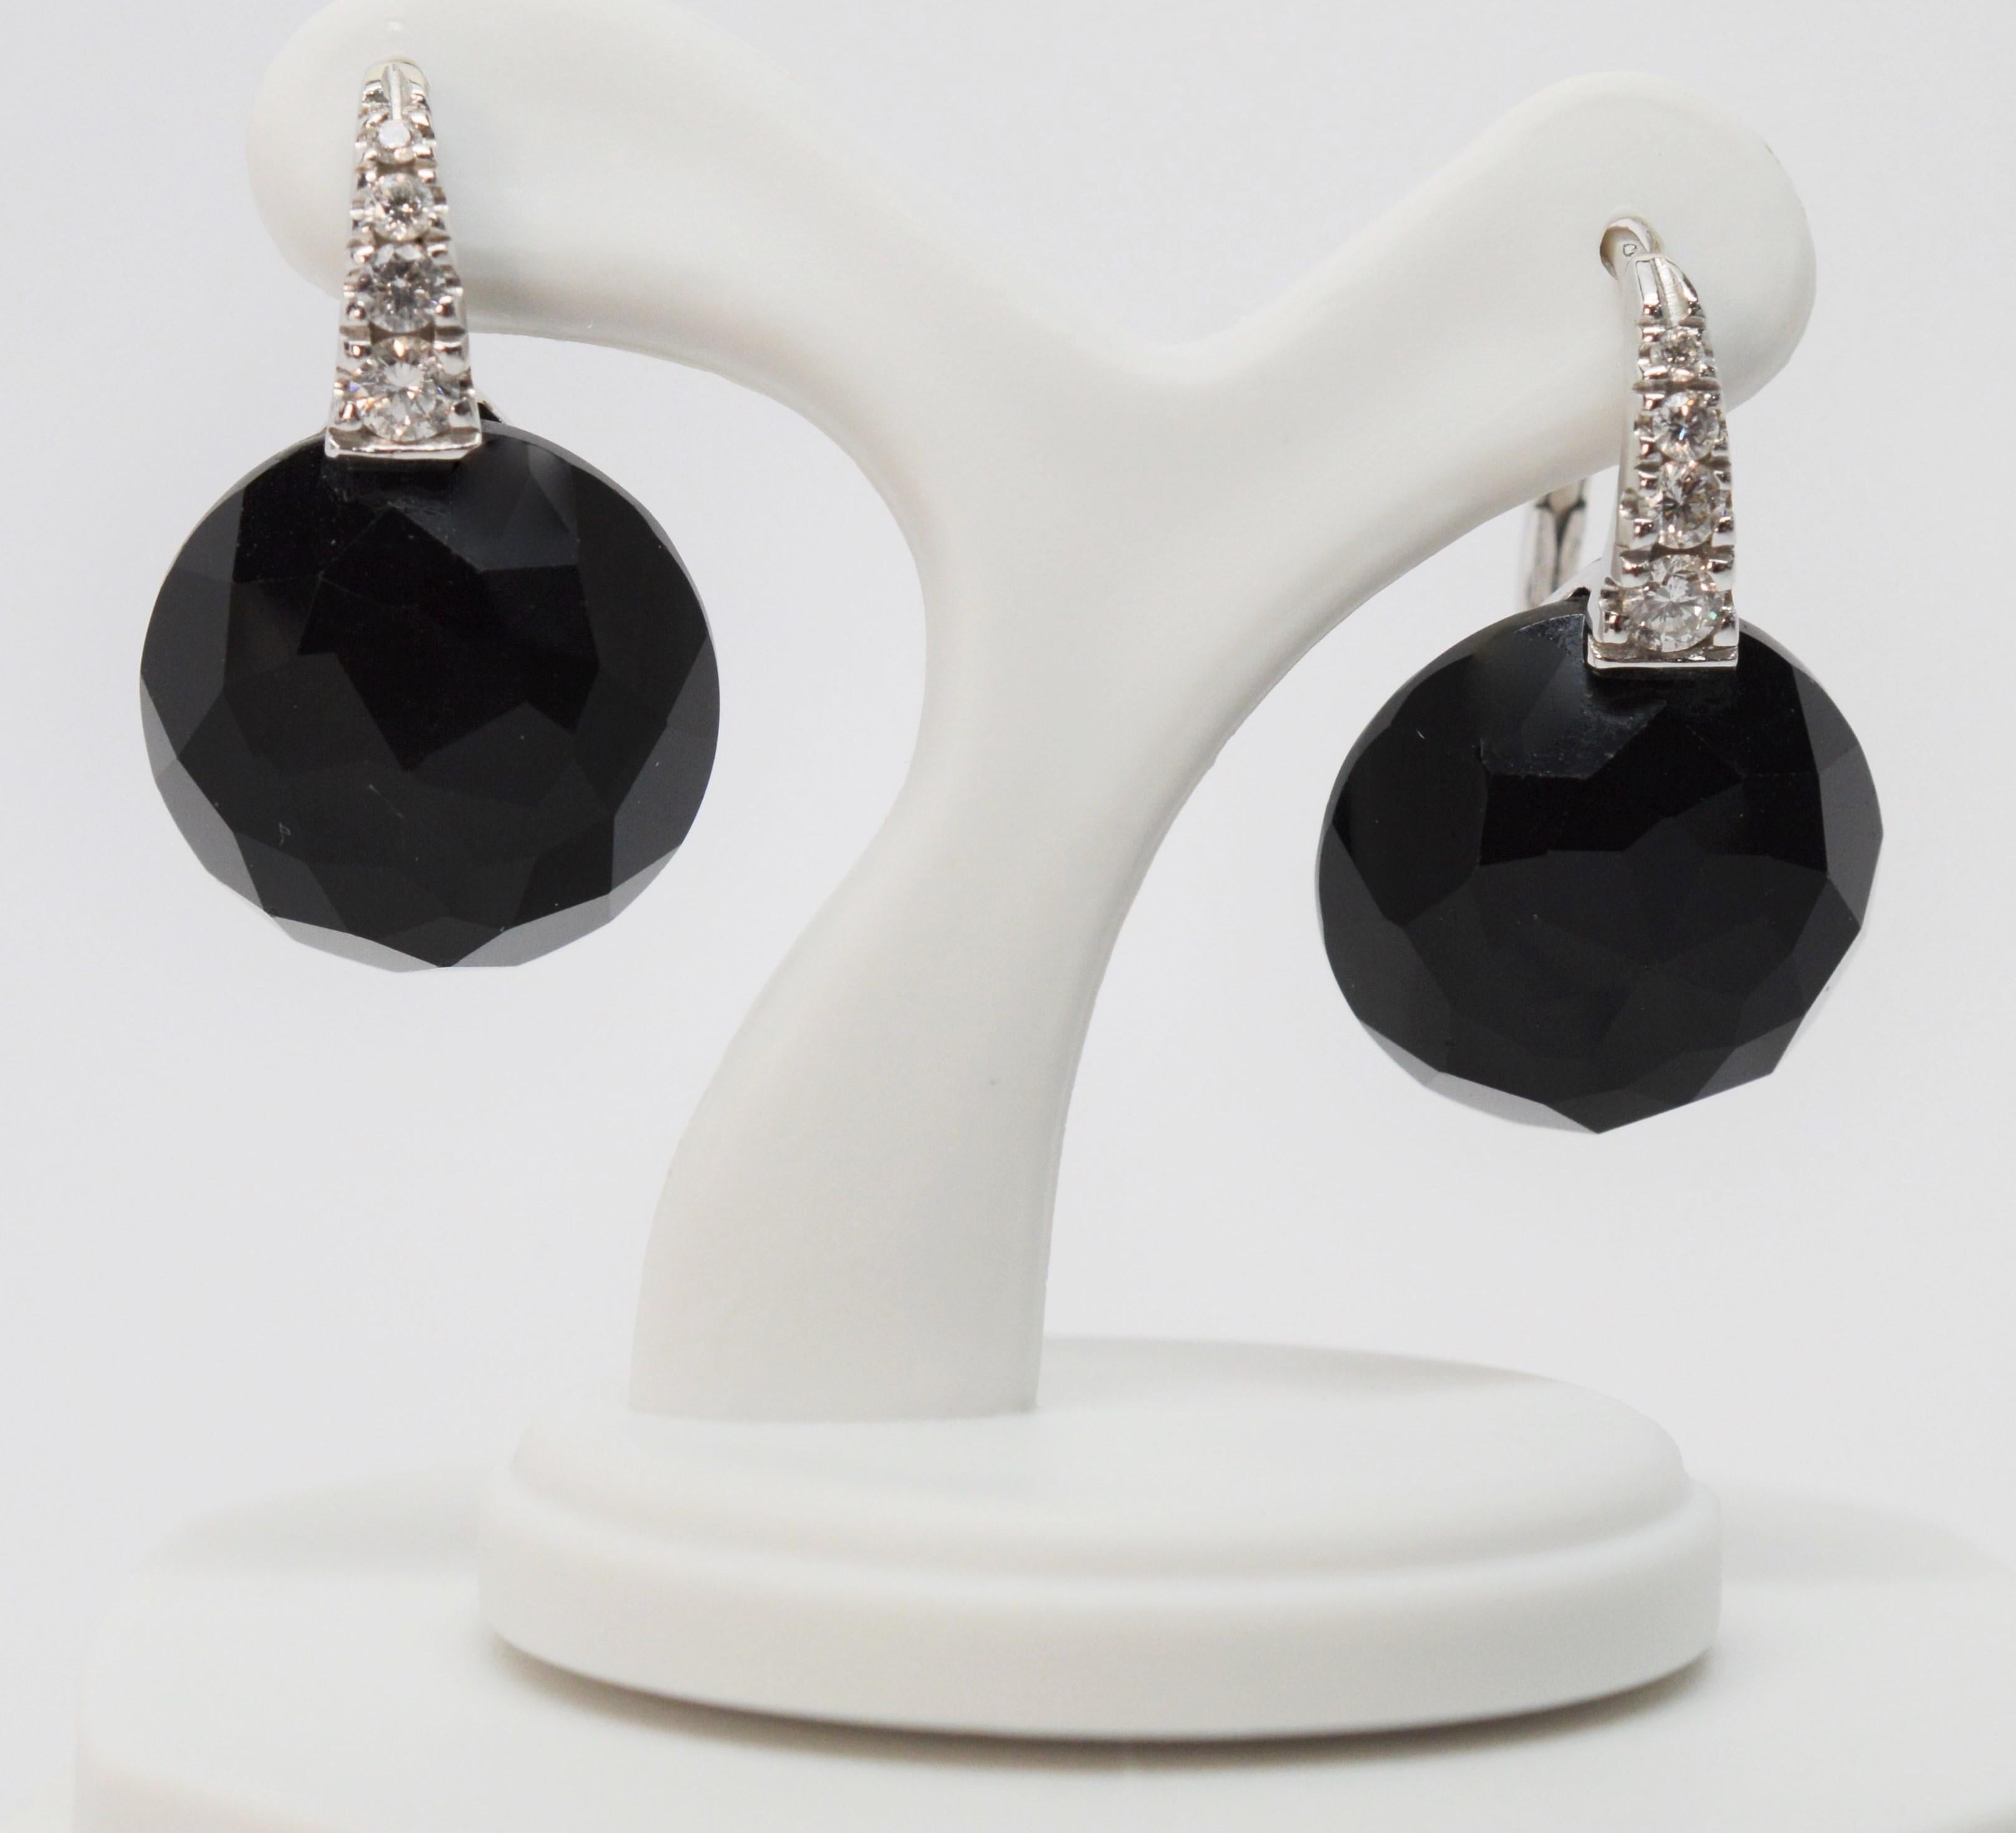 Enjoy the impact of a modern style drop earring pair with classic black and white characteristics. Bright full cut round diamonds, .26 carat total weight, adorned the eighteen karat leaver back stems that lead to facet cut black onyx 14mm cabochon